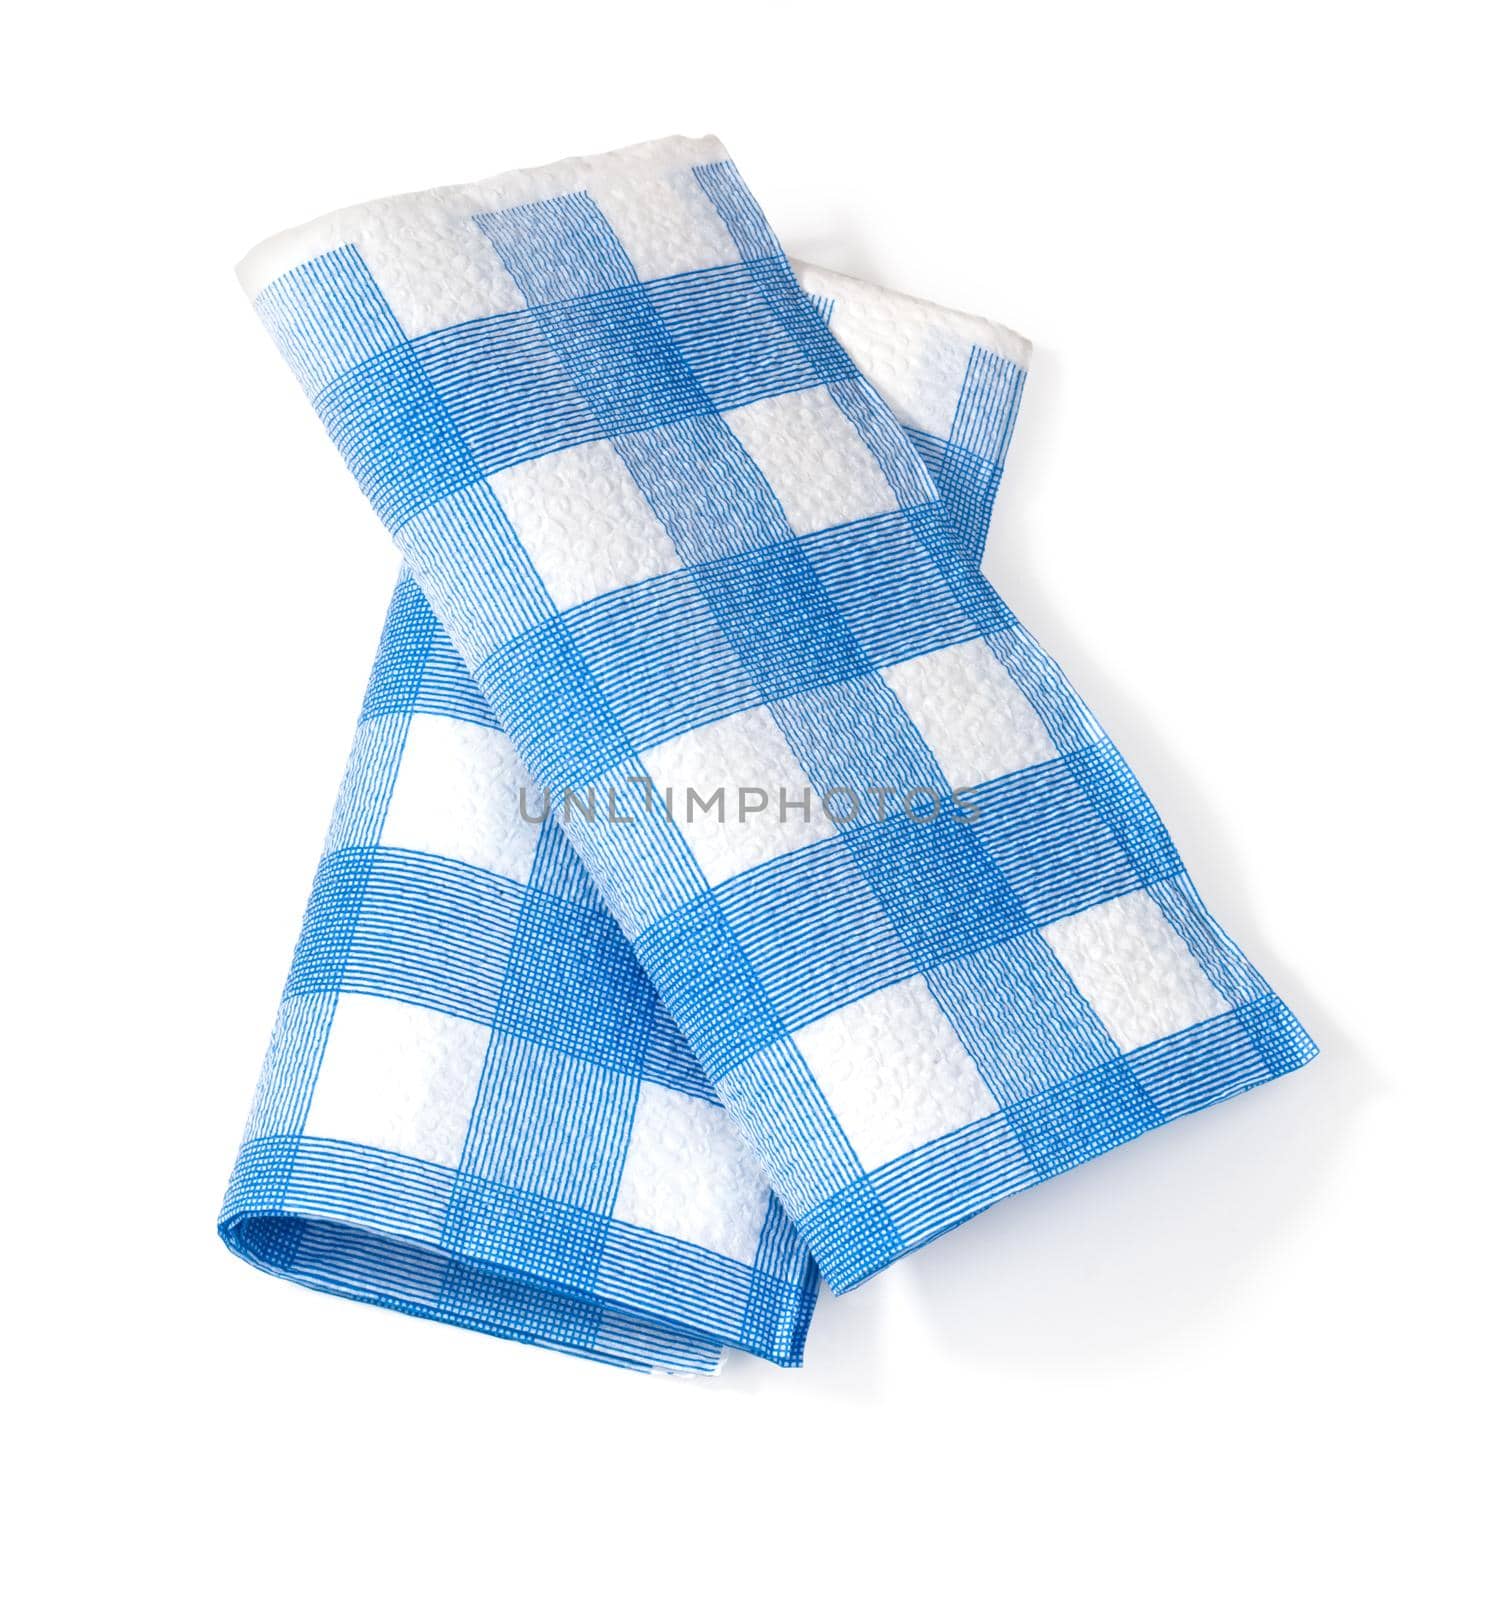 white napkin in the isolation of the blue square on a white background